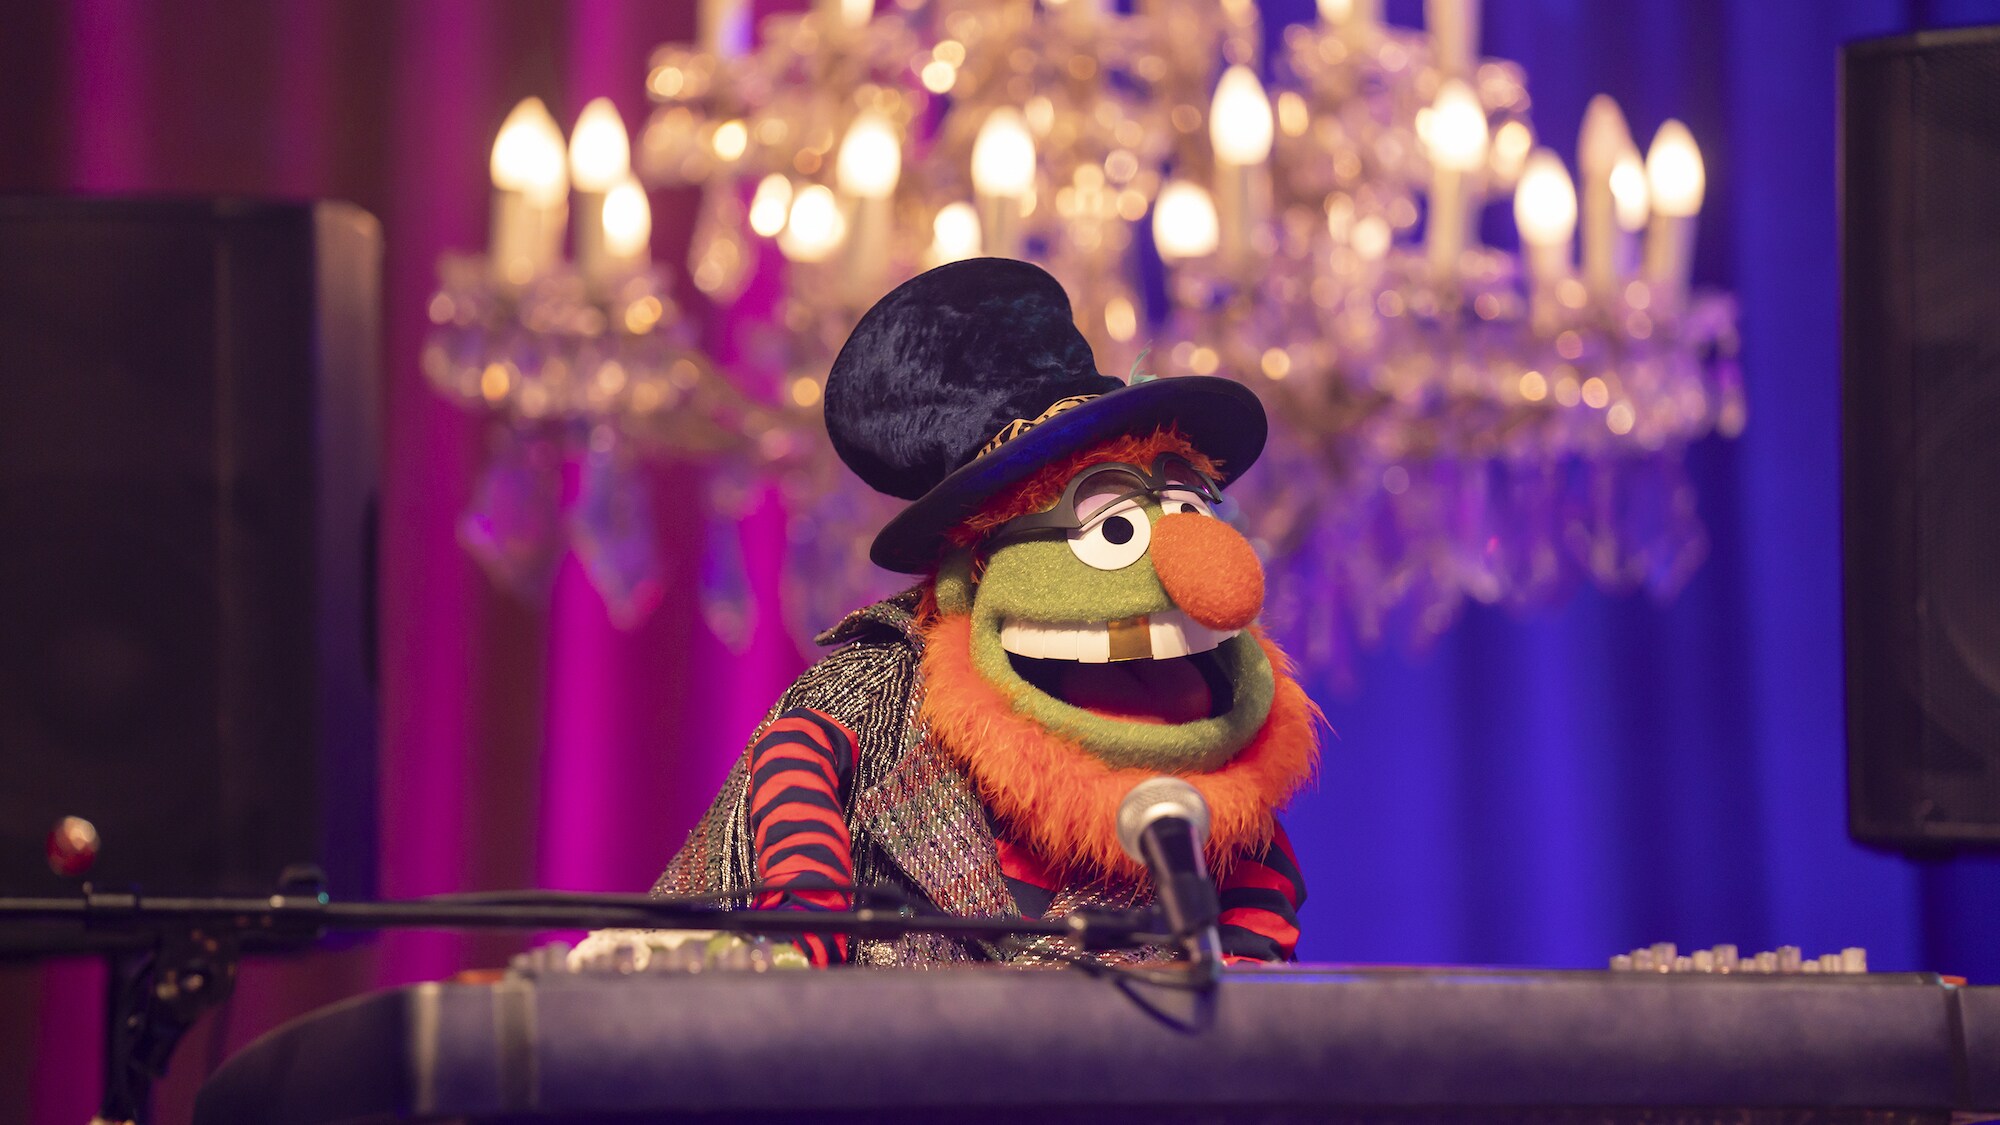 THE MUPPETS MAYHEM -  “Track 1: Can You Picture That?” (Disney/Mitch Haaseth) DR. TEETH